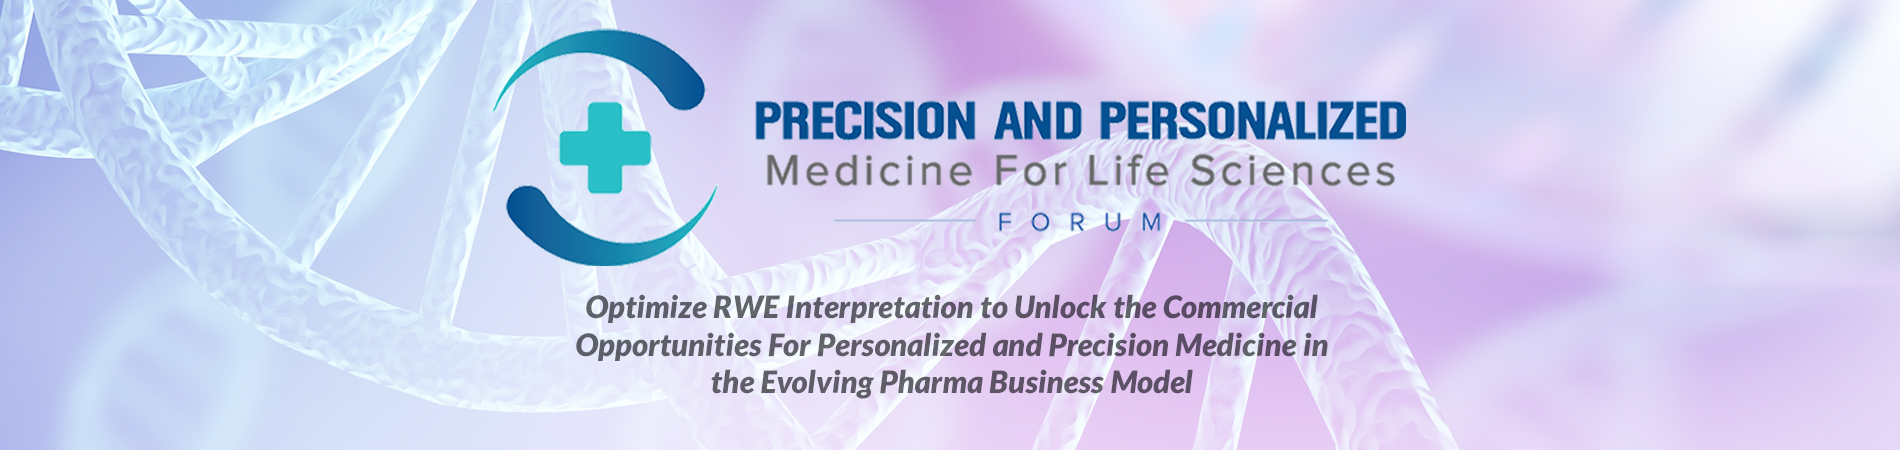 Precision and Personalized Medicine For Life Sciences